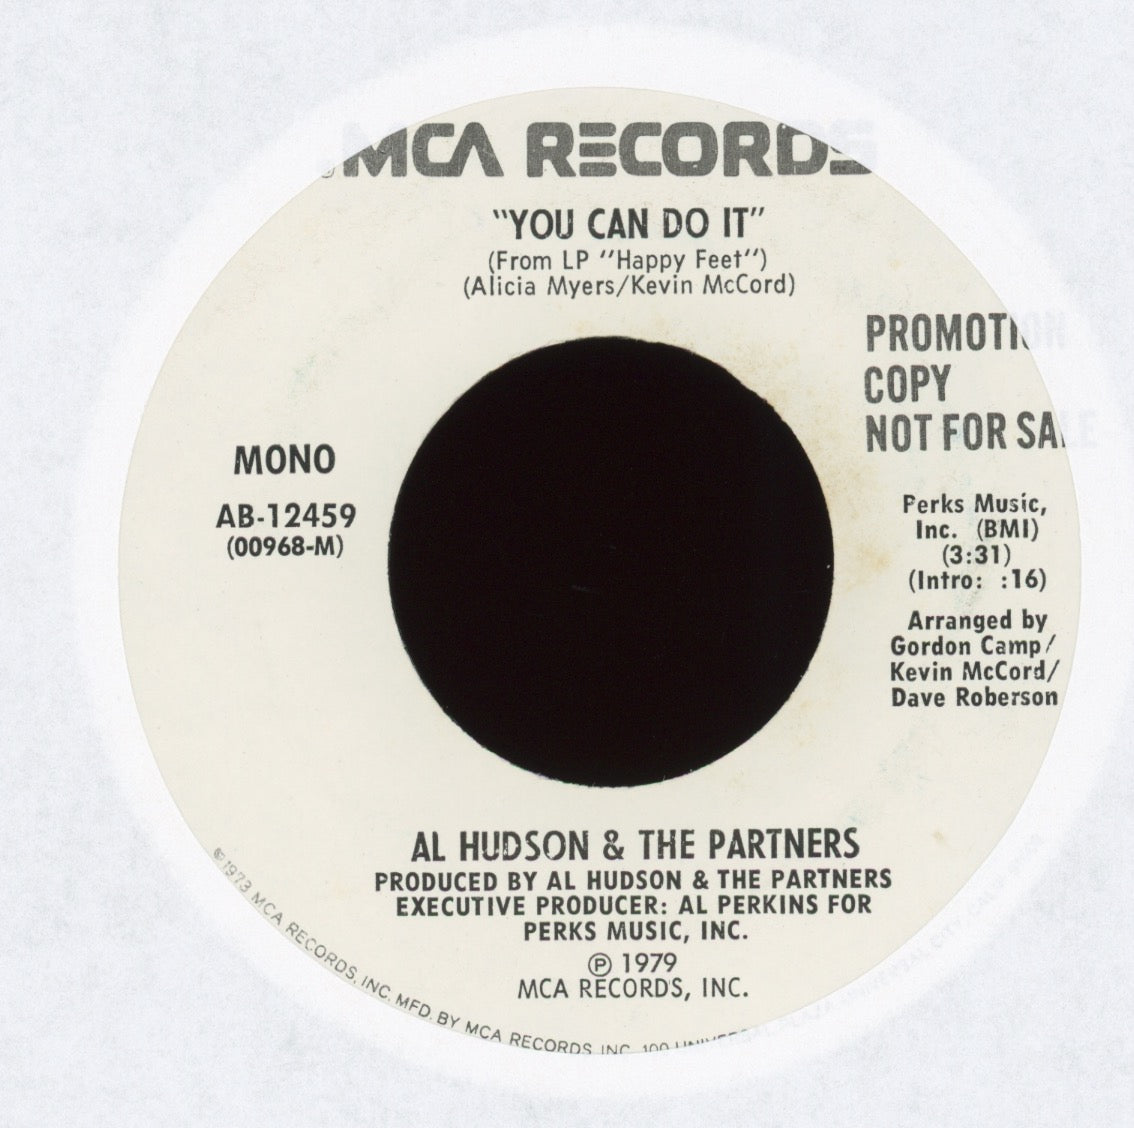 Al Hudson & The Partners - You Can Do It on MCA Promo